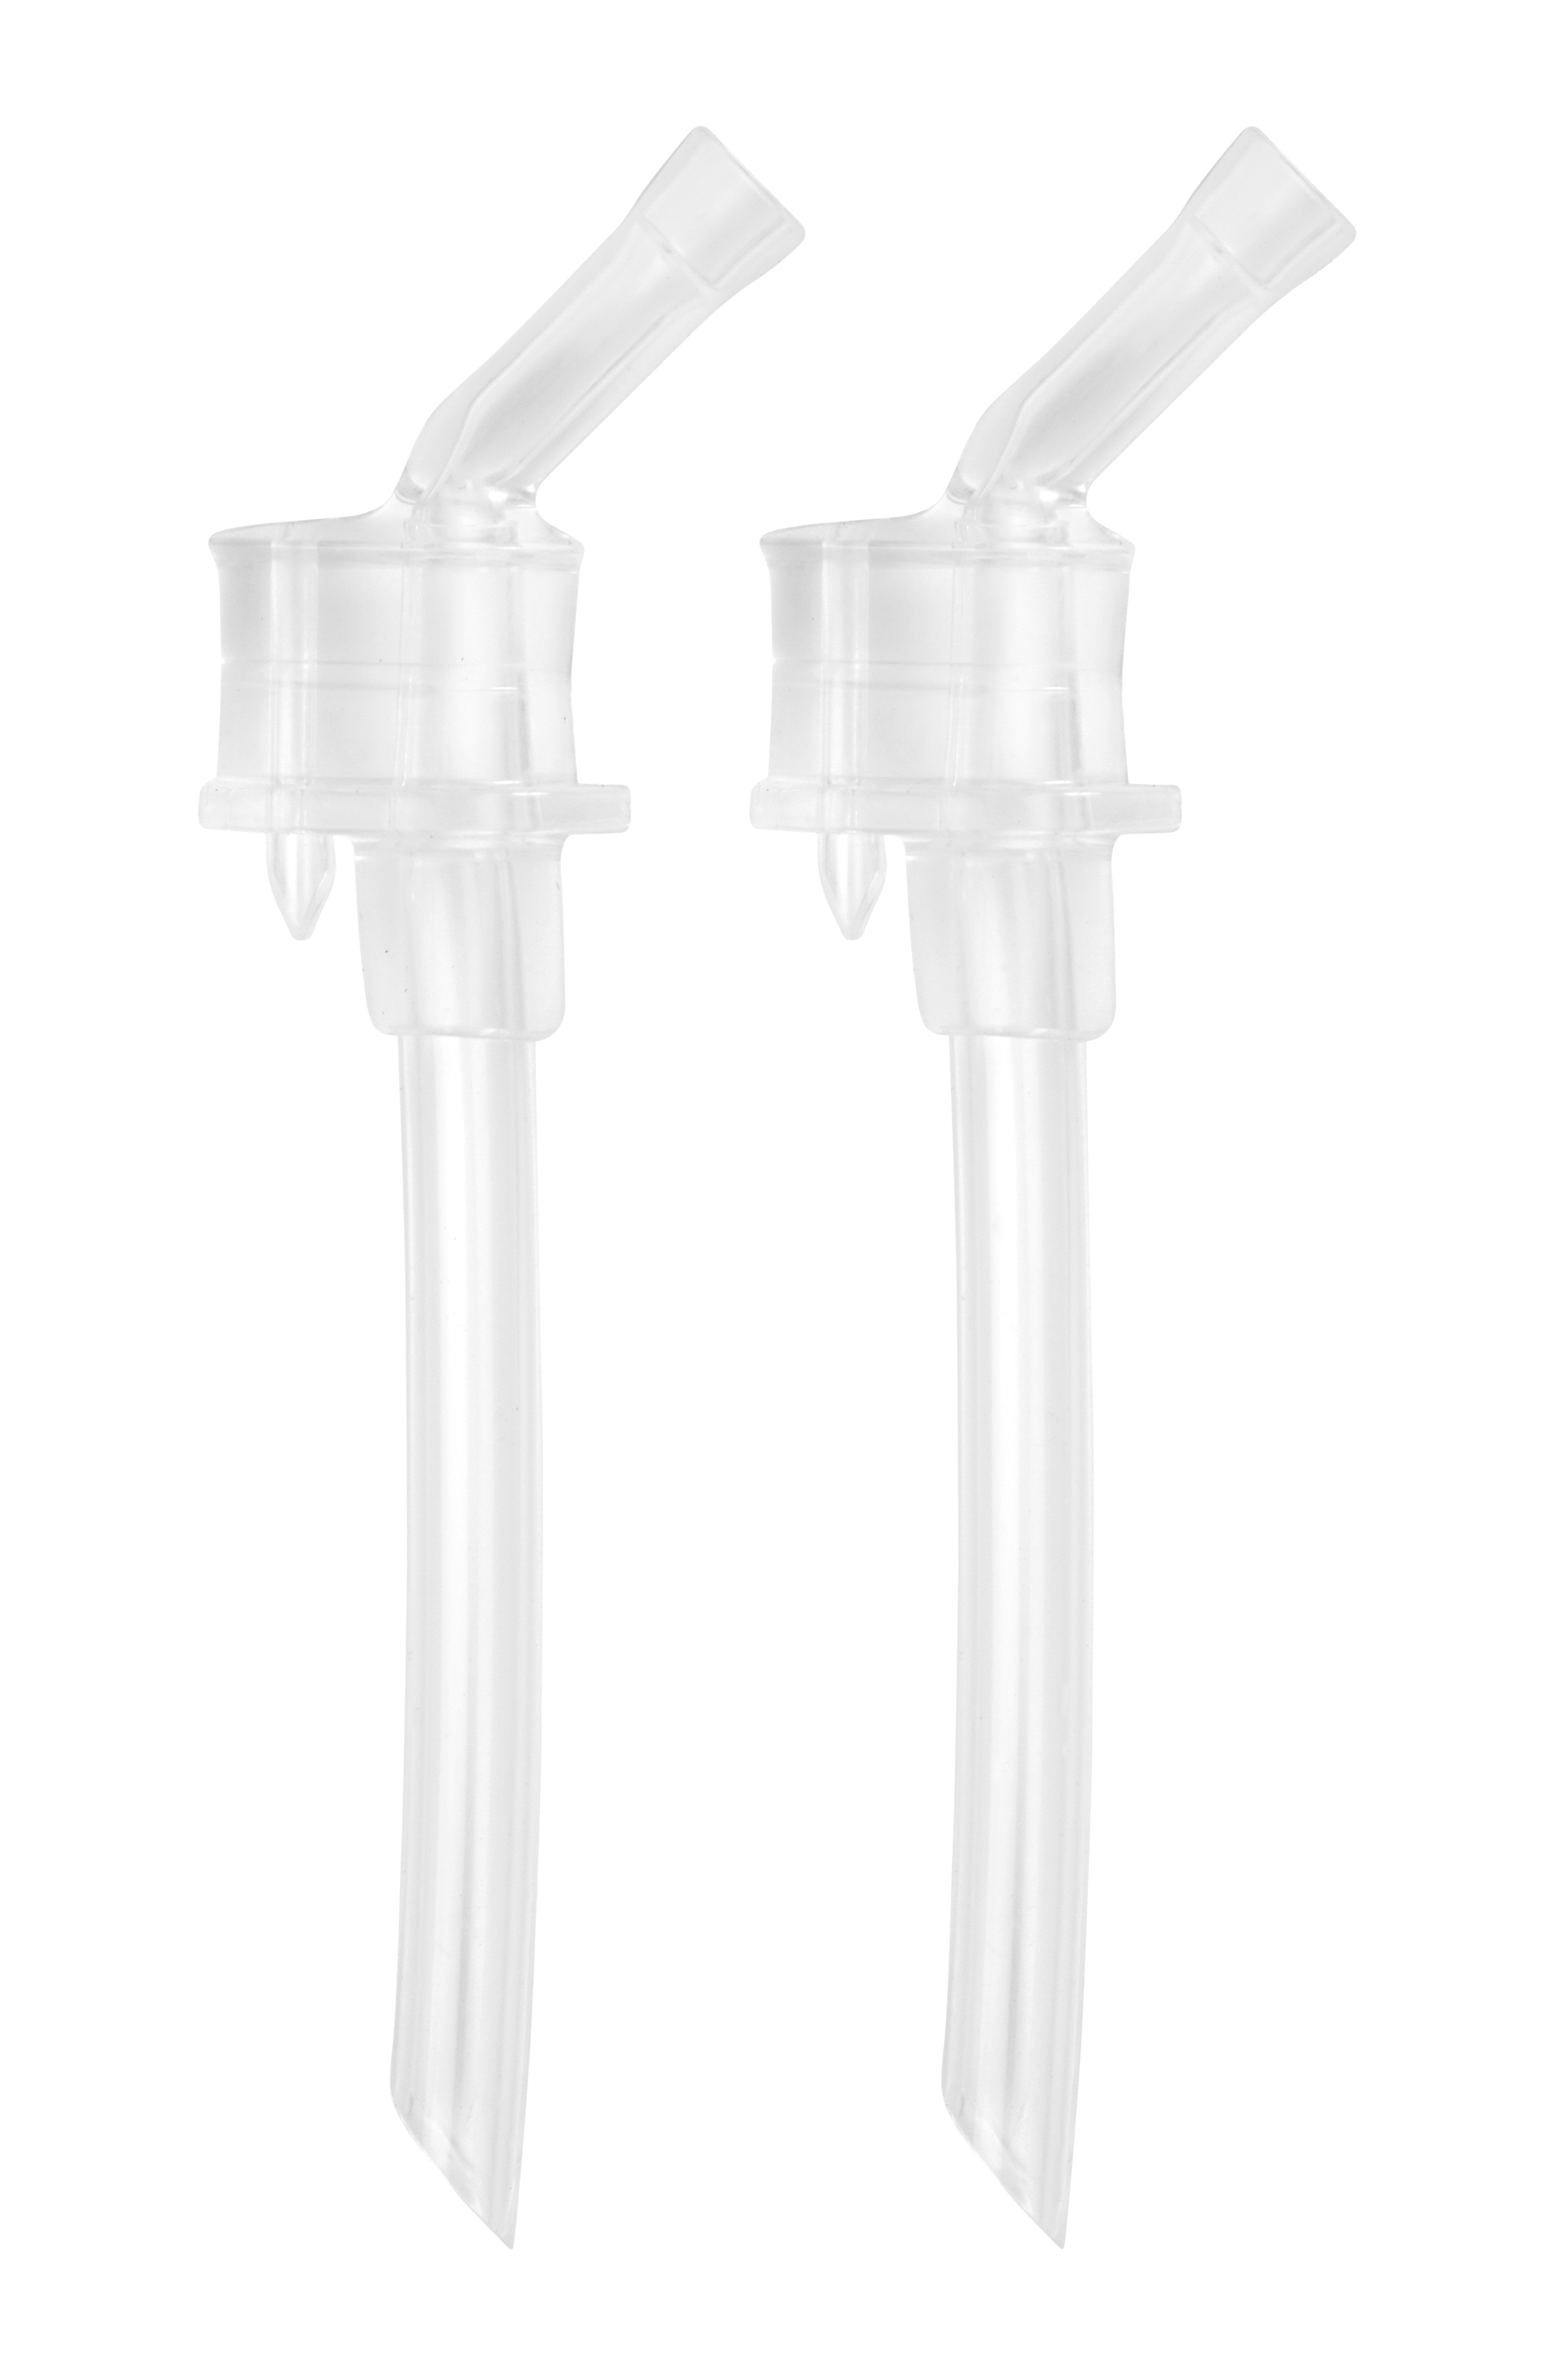 Beaba Straw Cup Replacement Straw - 2 units